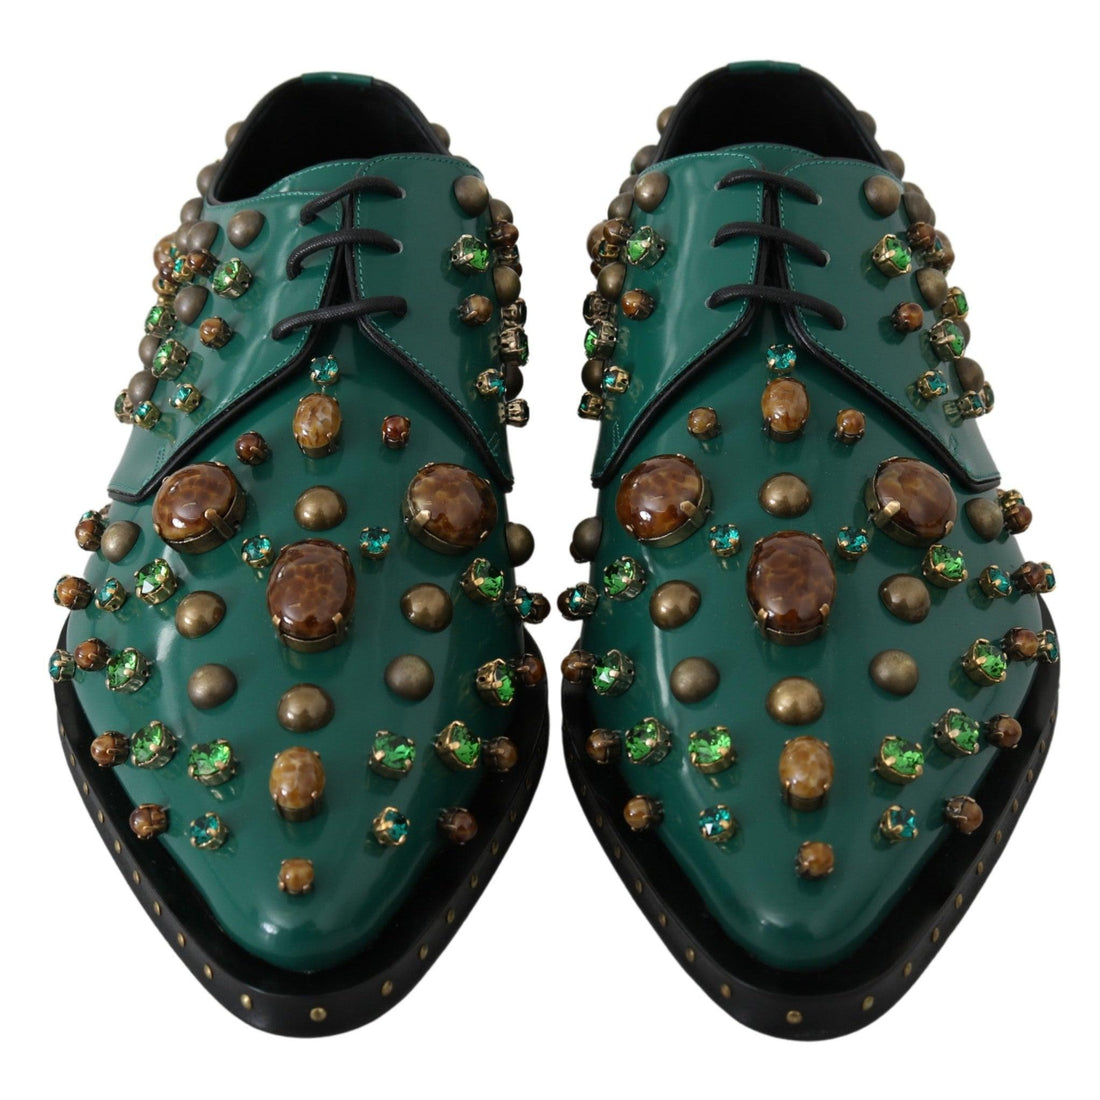 Dolce & Gabbana Green Leather Crystal Dress Broque Shoes - Paris Deluxe